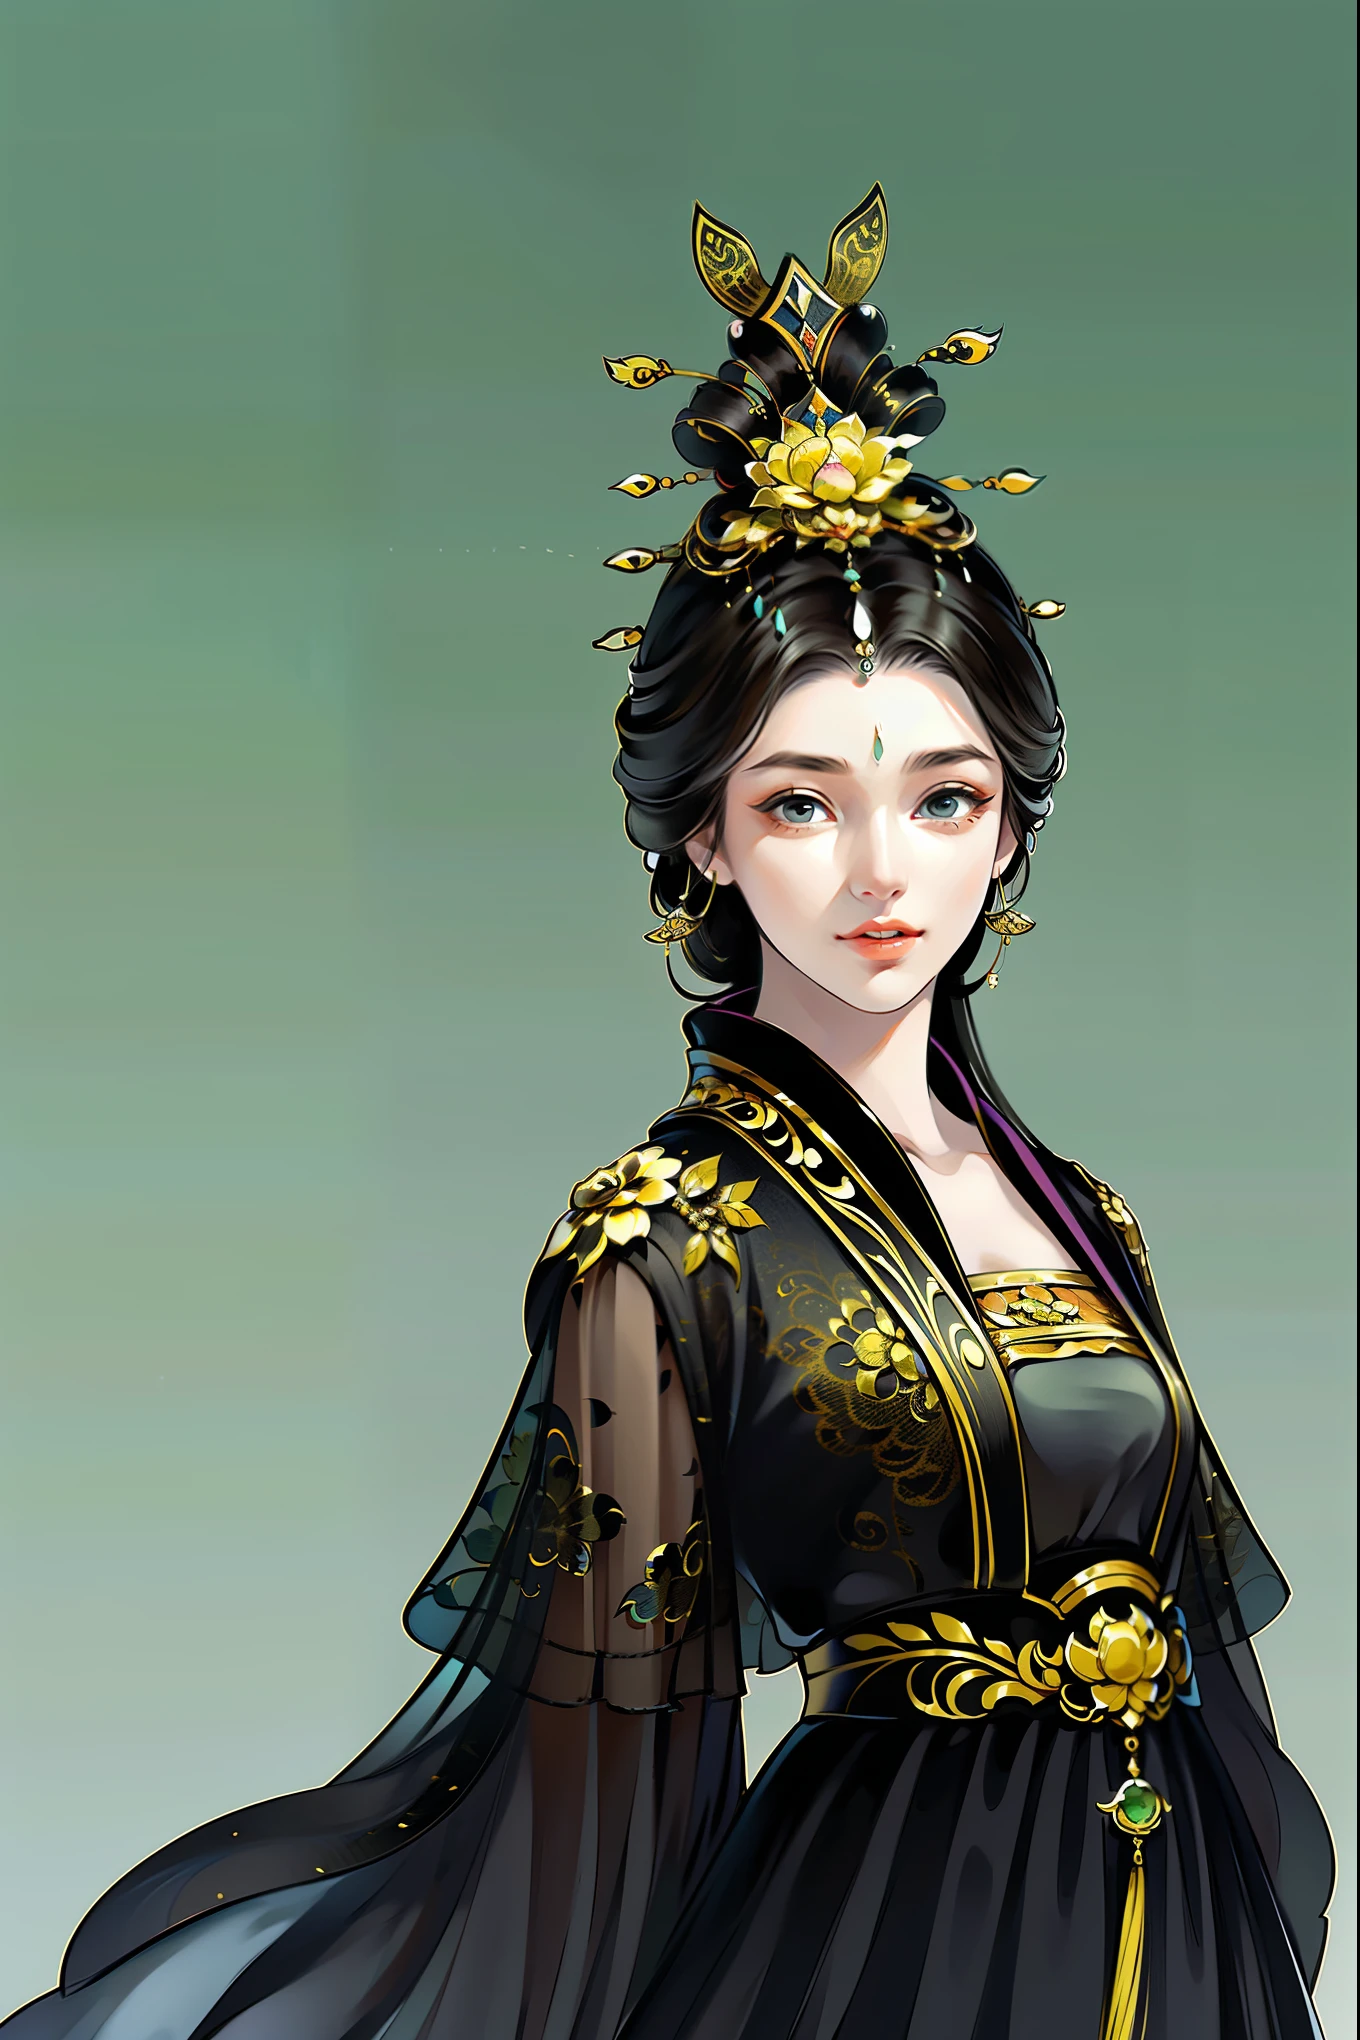 （masterpiece，super detailed，HD details，highly detailed art）1 girl，Half body，xianxia，monochrome，black dress，elegant，Highly detailed character designs from East Asia，Game character costume design，simple，ultra high resolution, sharp focus, epic work, masterpiece, (Very detailed CG unified 8k wallpaper)，pretty face，beautiful eyes，HD details